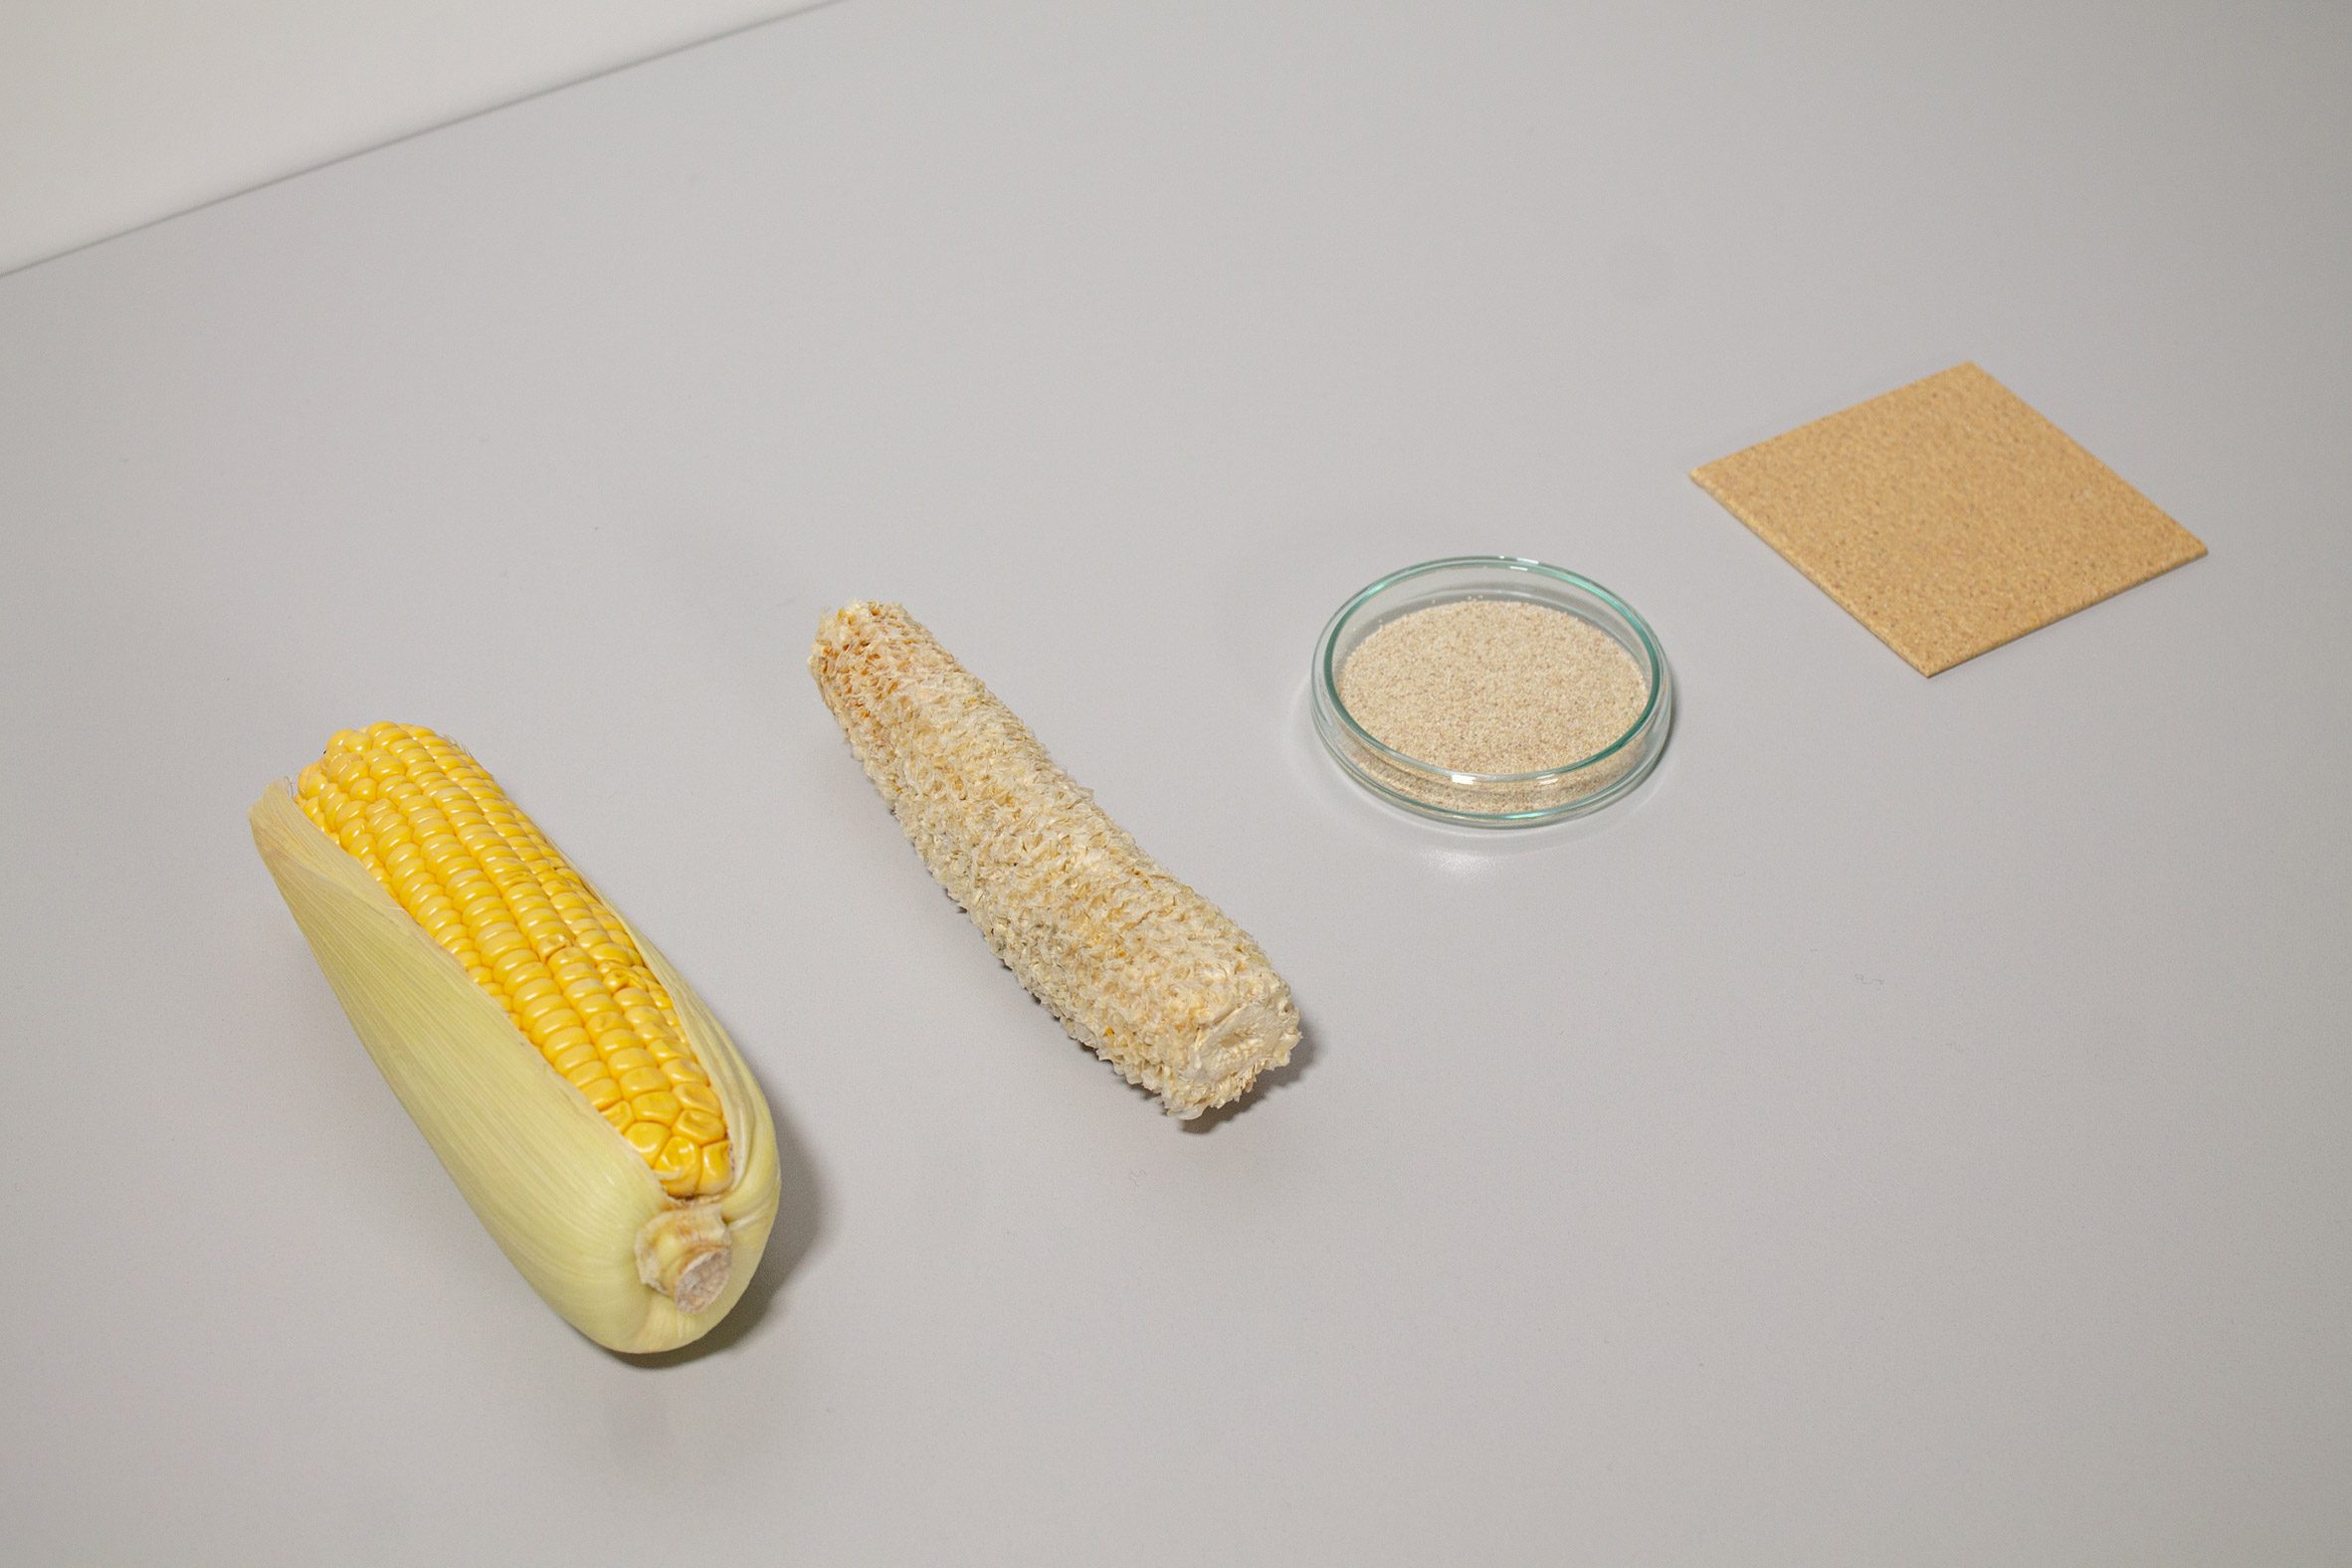 Photo of four objects in flatlay — a full corn cob on the left, followed by a bare corn cob, then a small tray of shredded biomass, then a CornWall tile